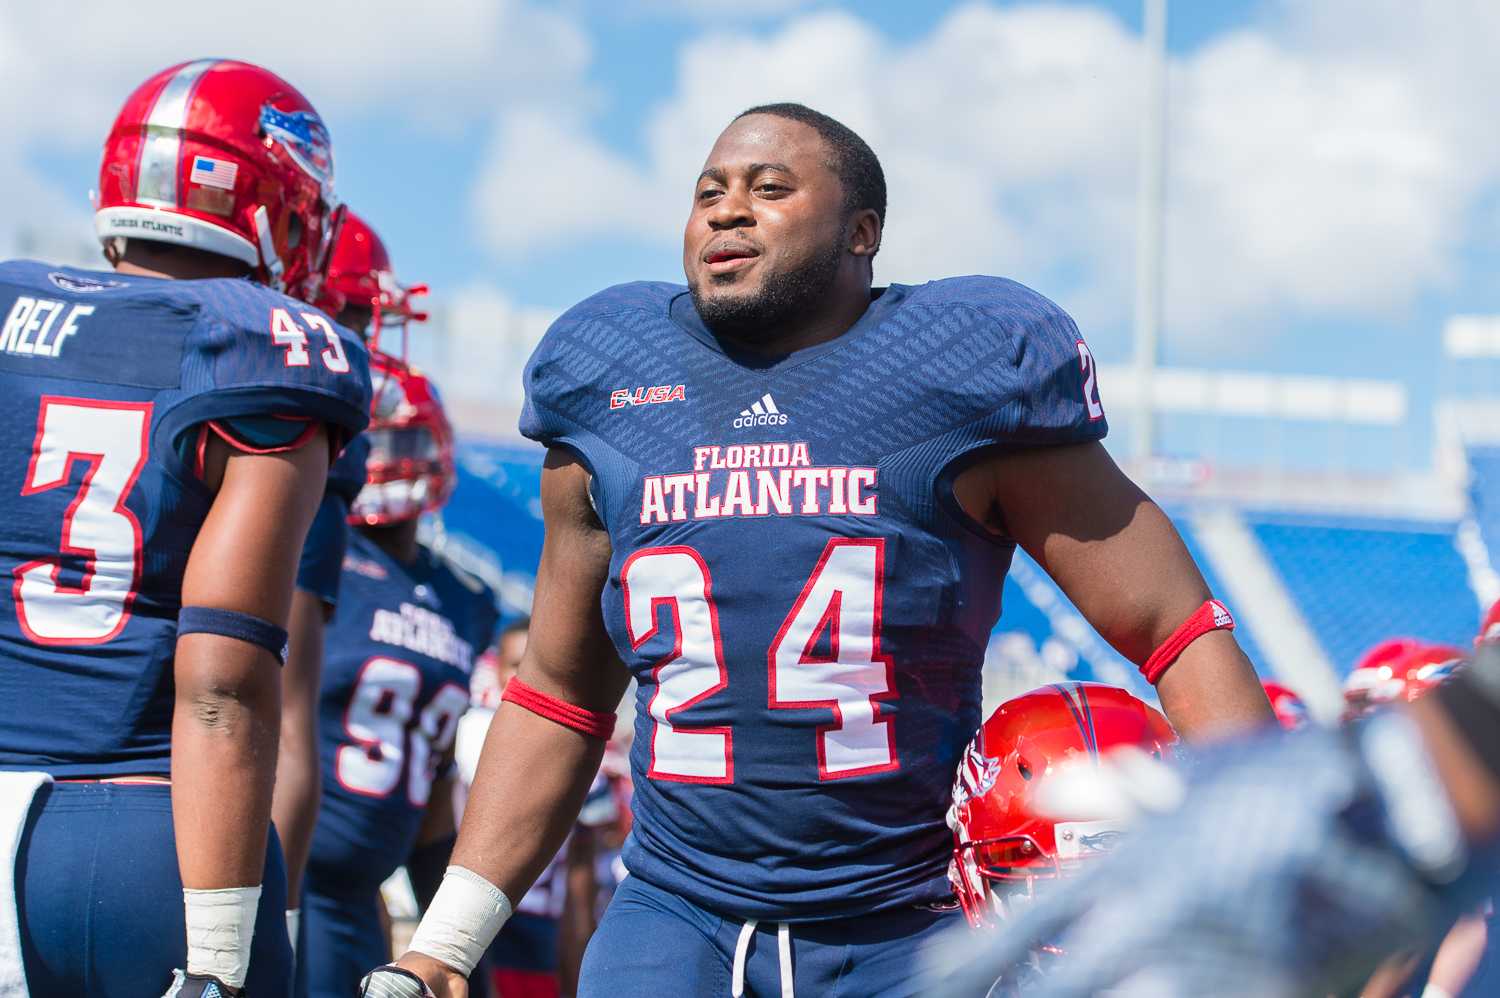 FAU senior running back Tony Moore walks through the human tunnel of teammates during the Senior Day Celebration prior to the game.  